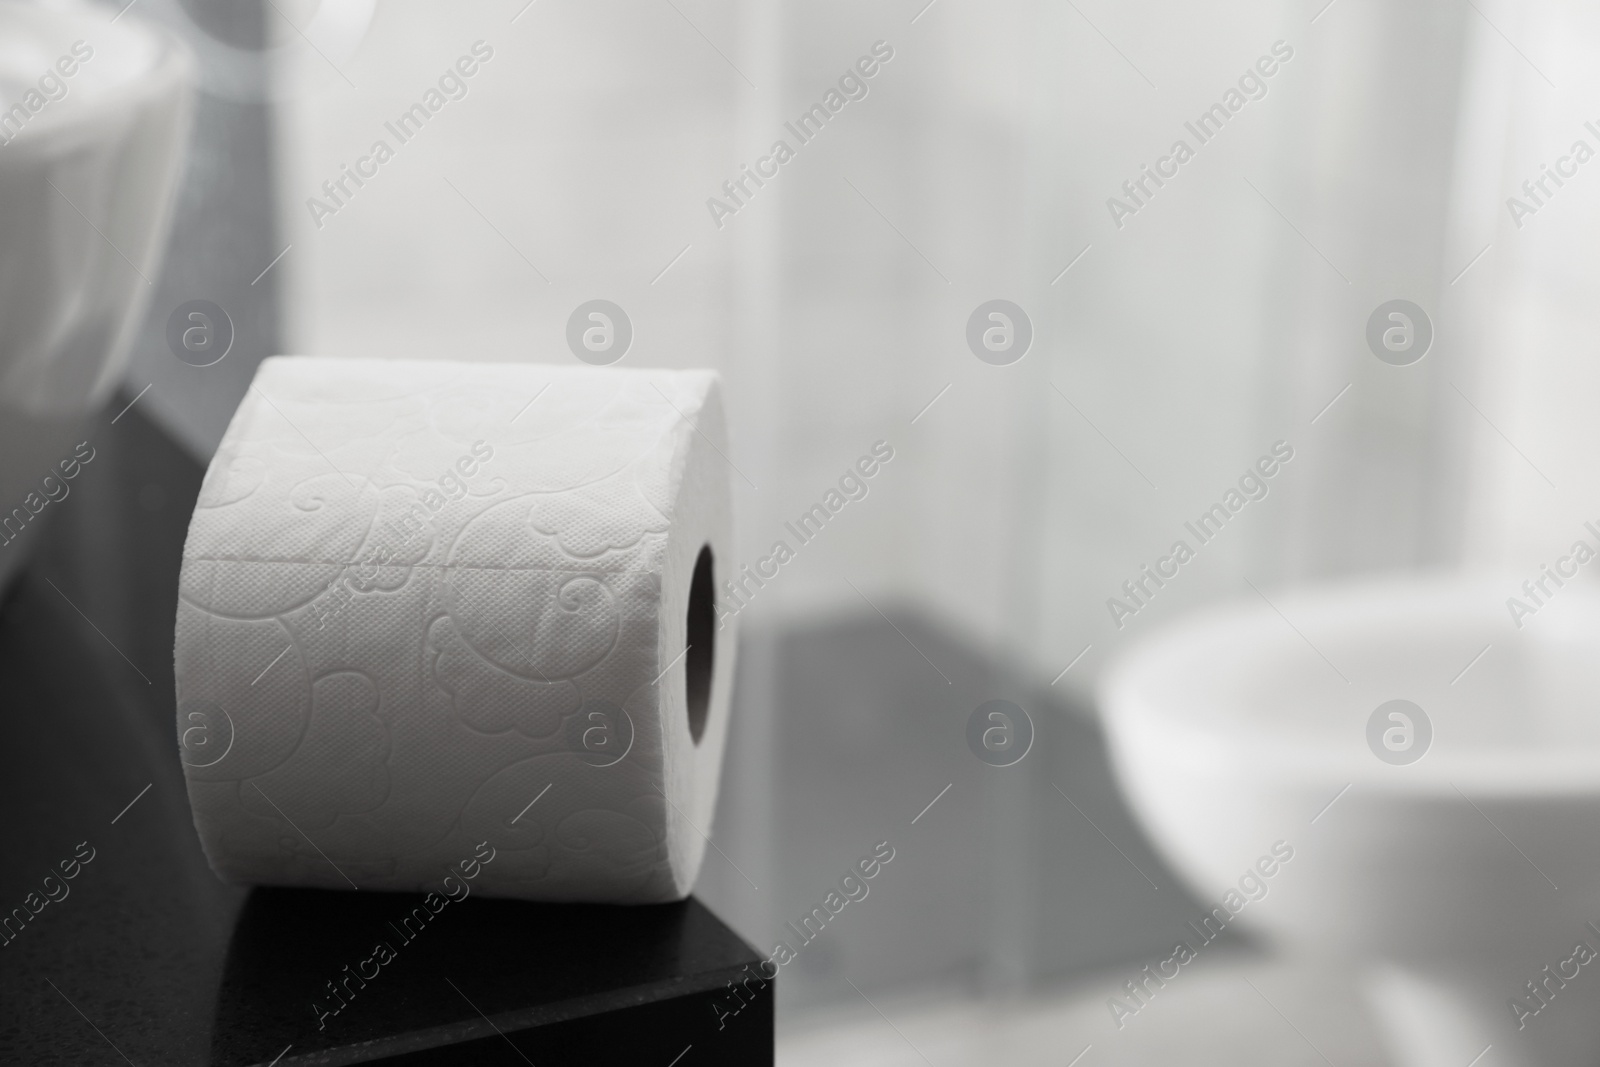 Photo of Toilet paper roll on table in bathroom. Space for text